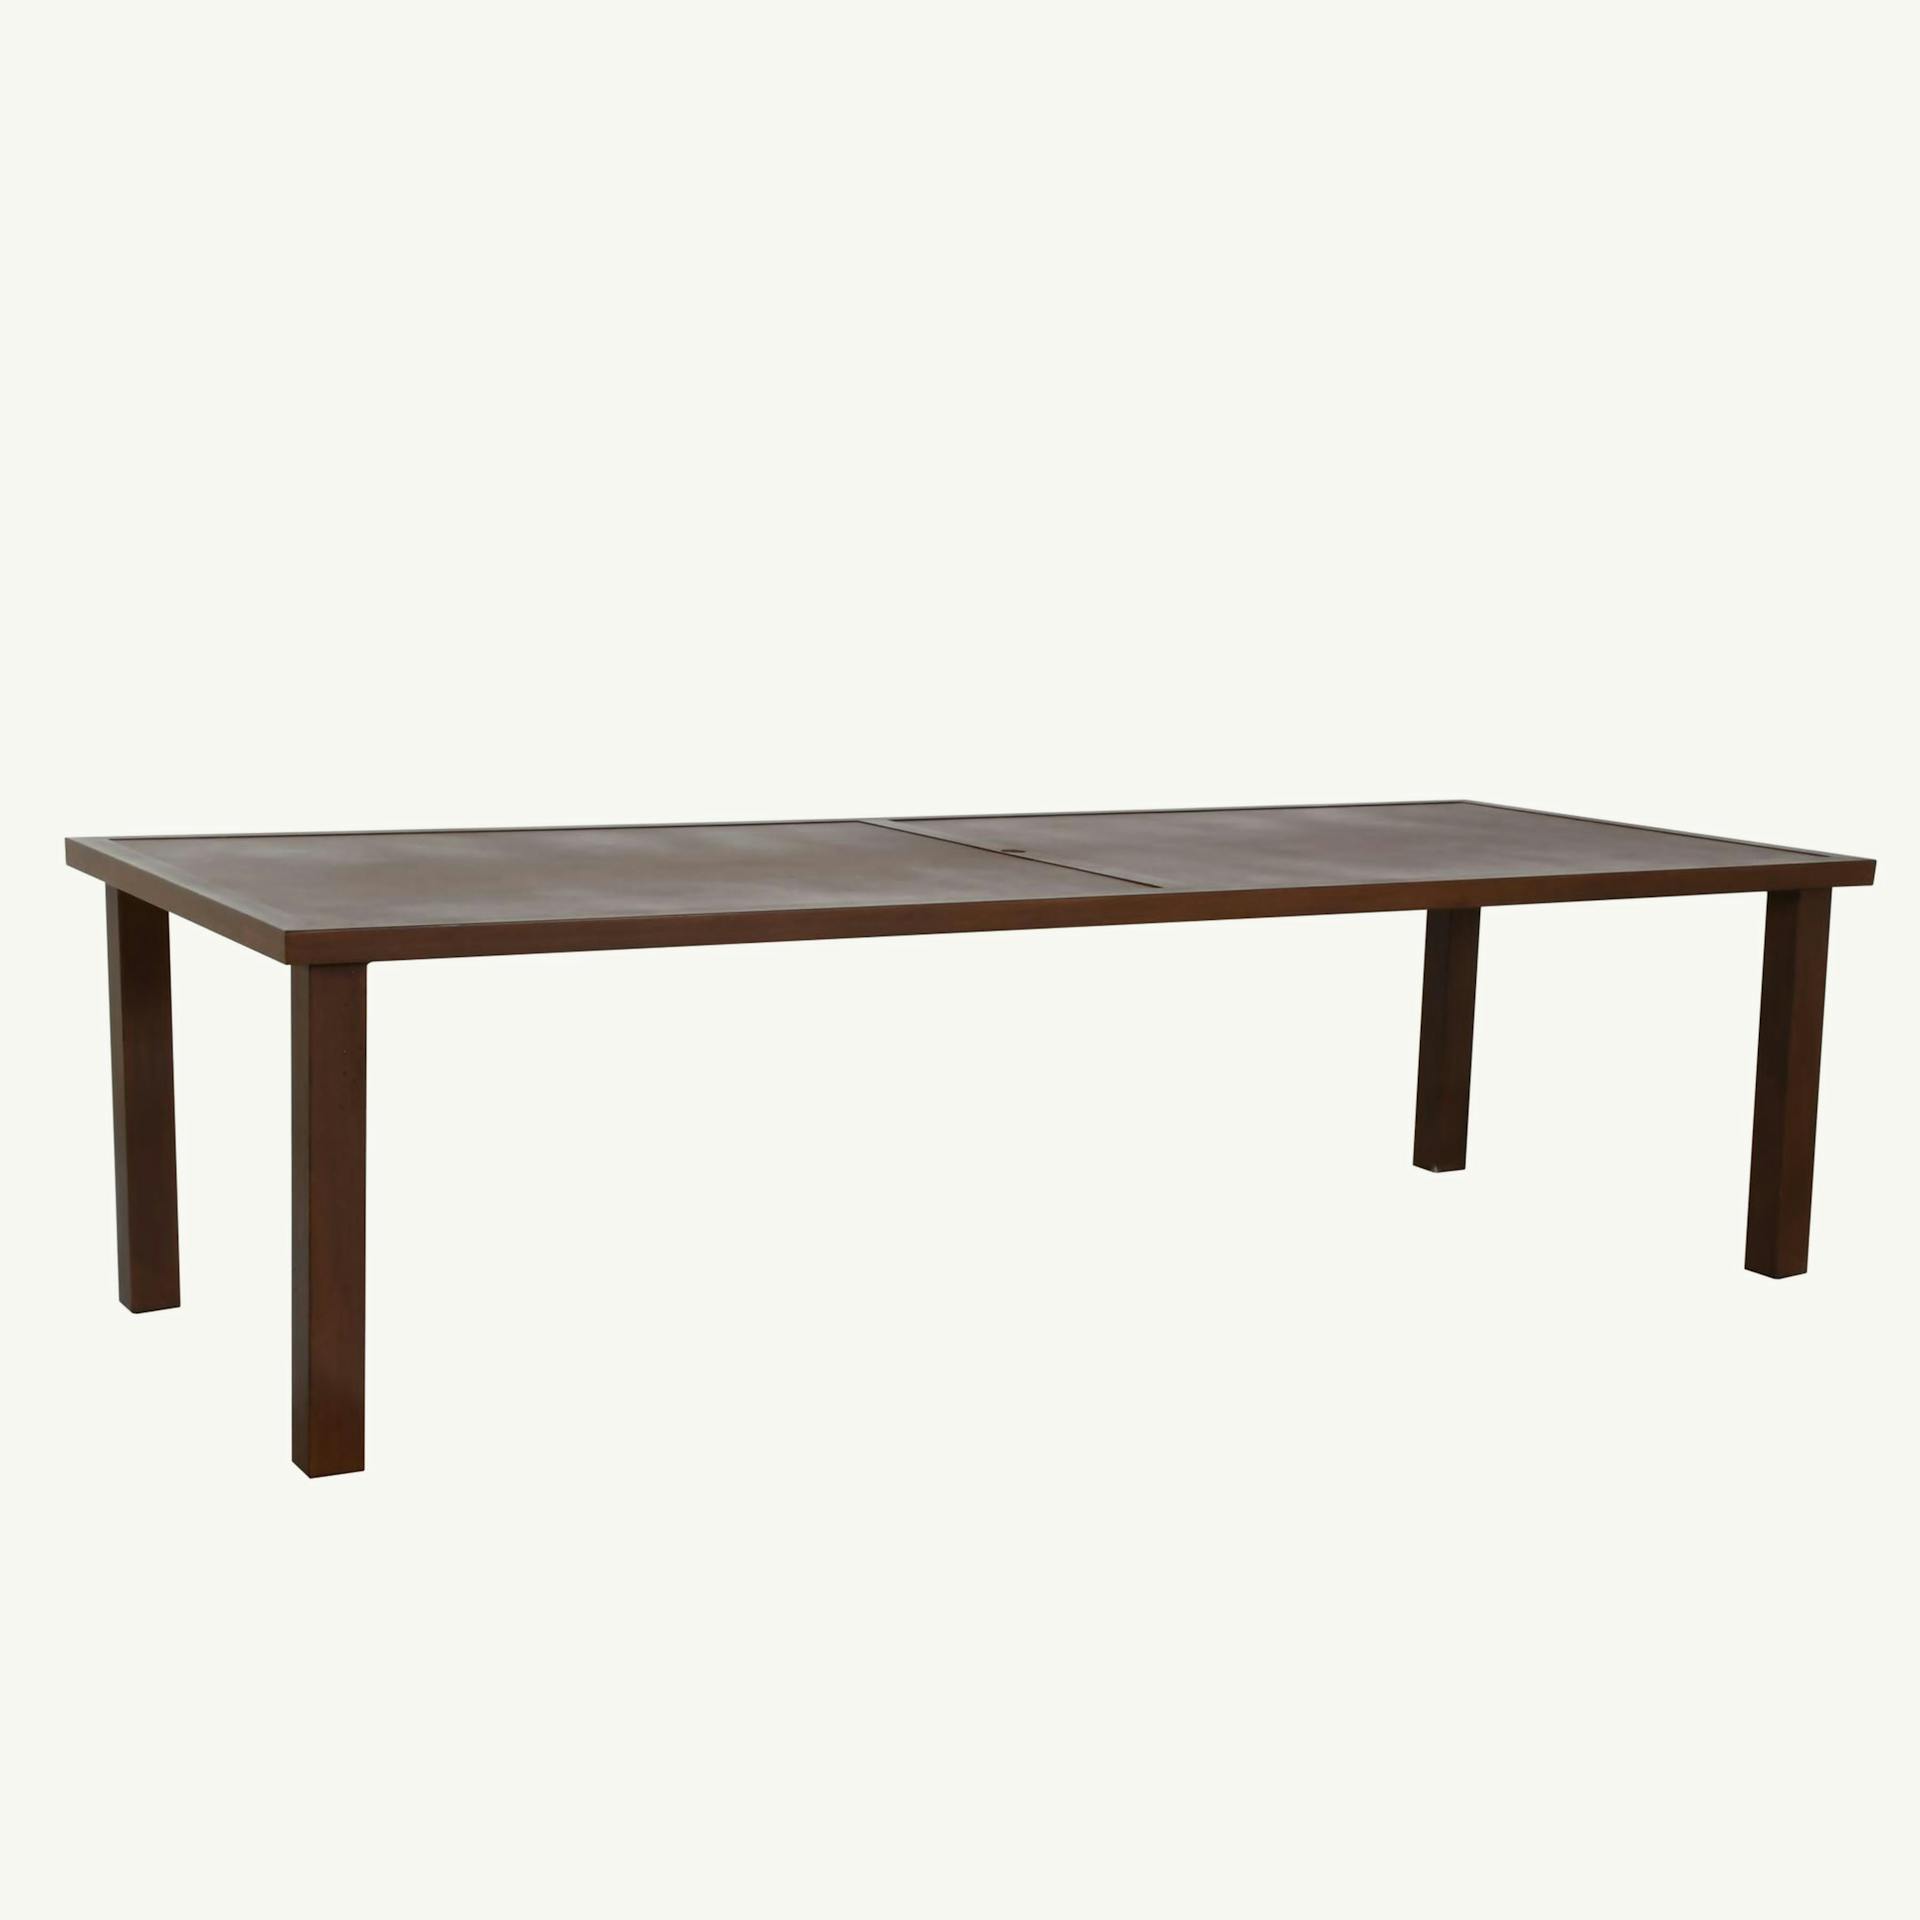 Parsons Tables 42" X 116" Rectangular Table